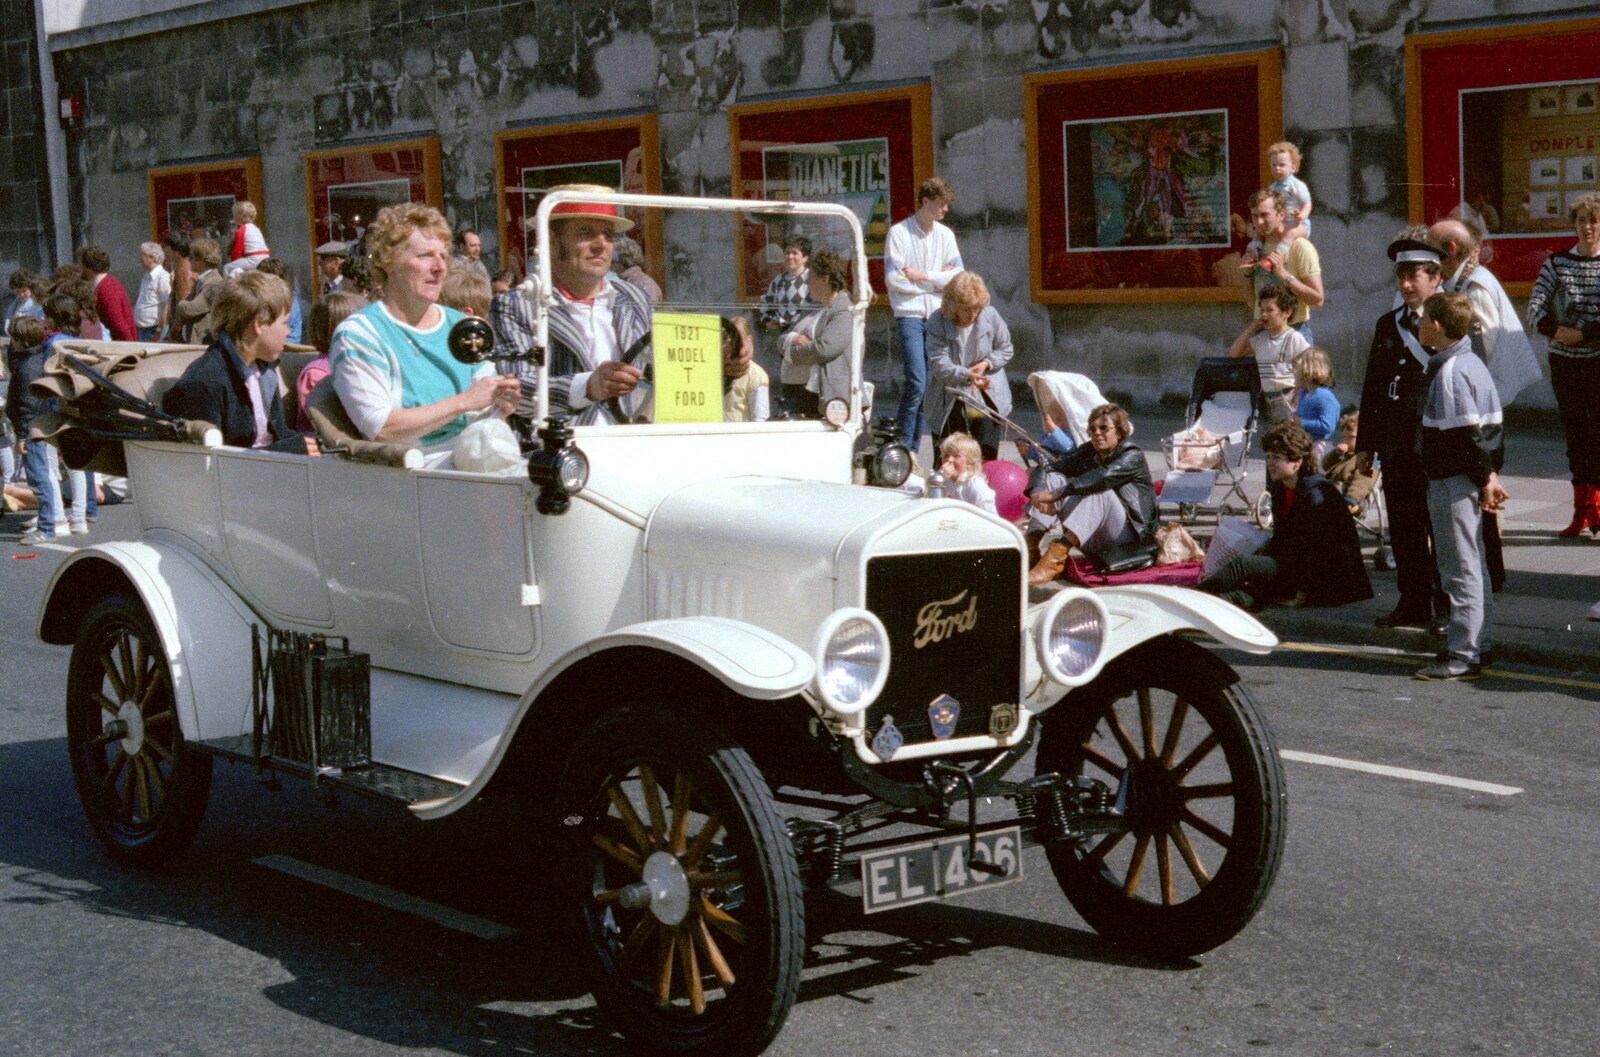 An open-top Ford Model T from Uni: The Lord Mayor's Procession, Plymouth, Devon - 21st May 1986